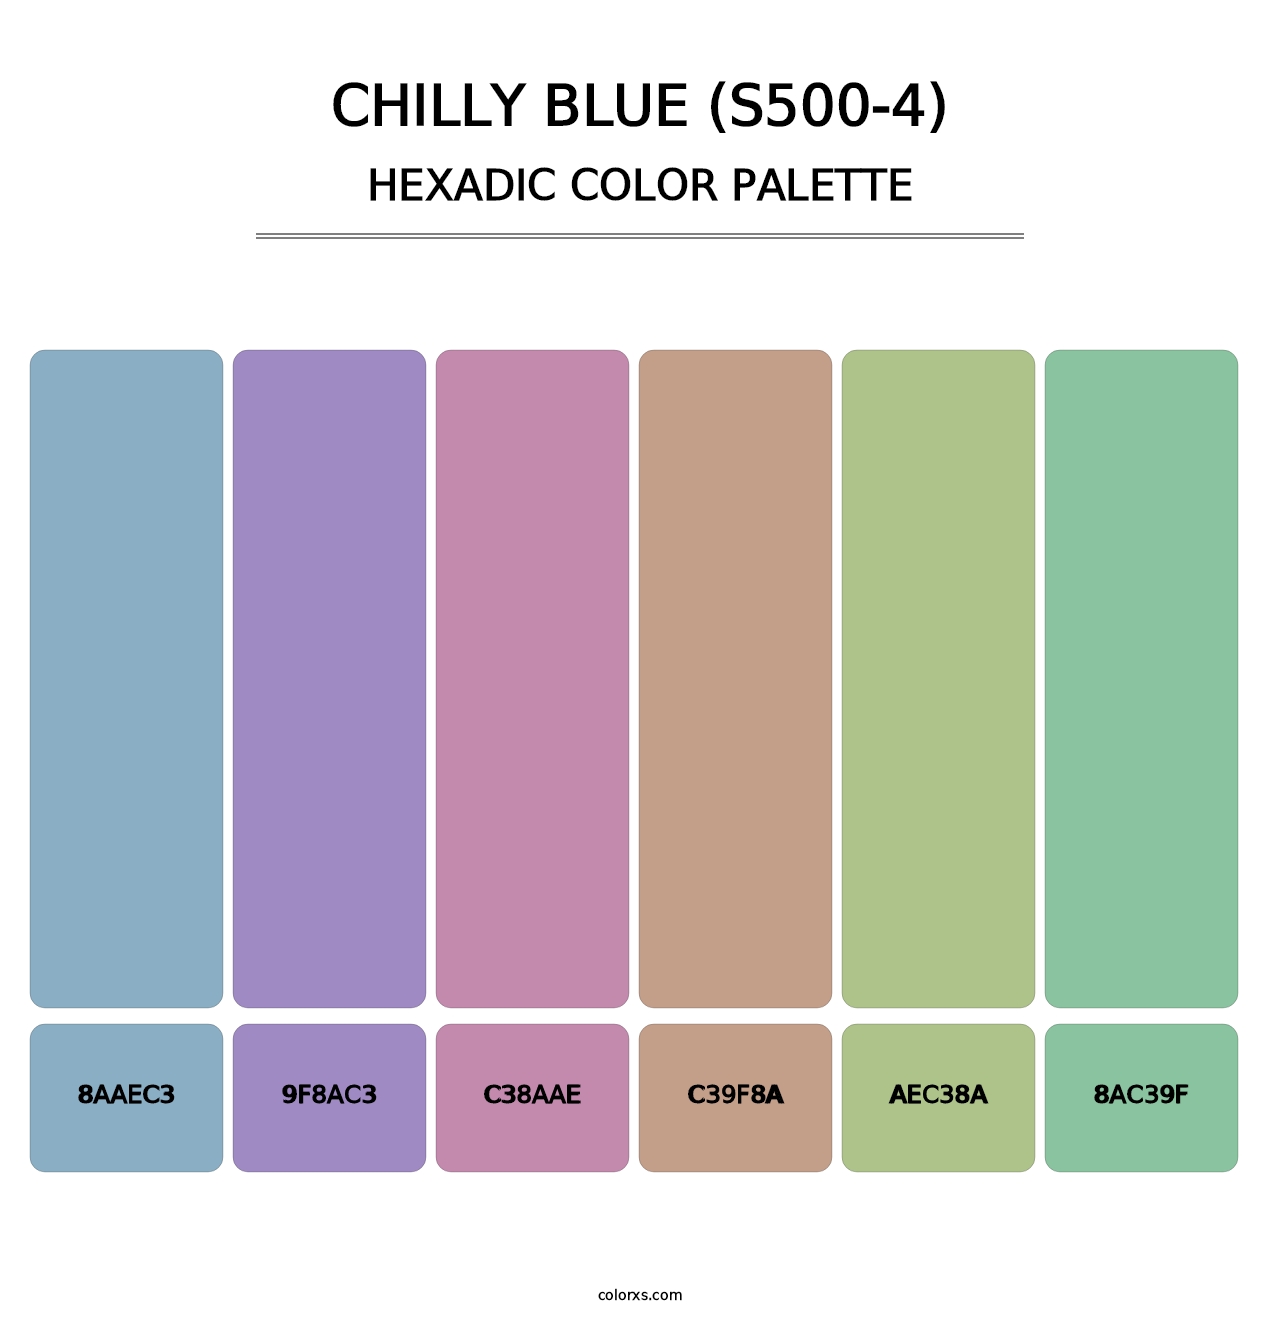 Chilly Blue (S500-4) - Hexadic Color Palette